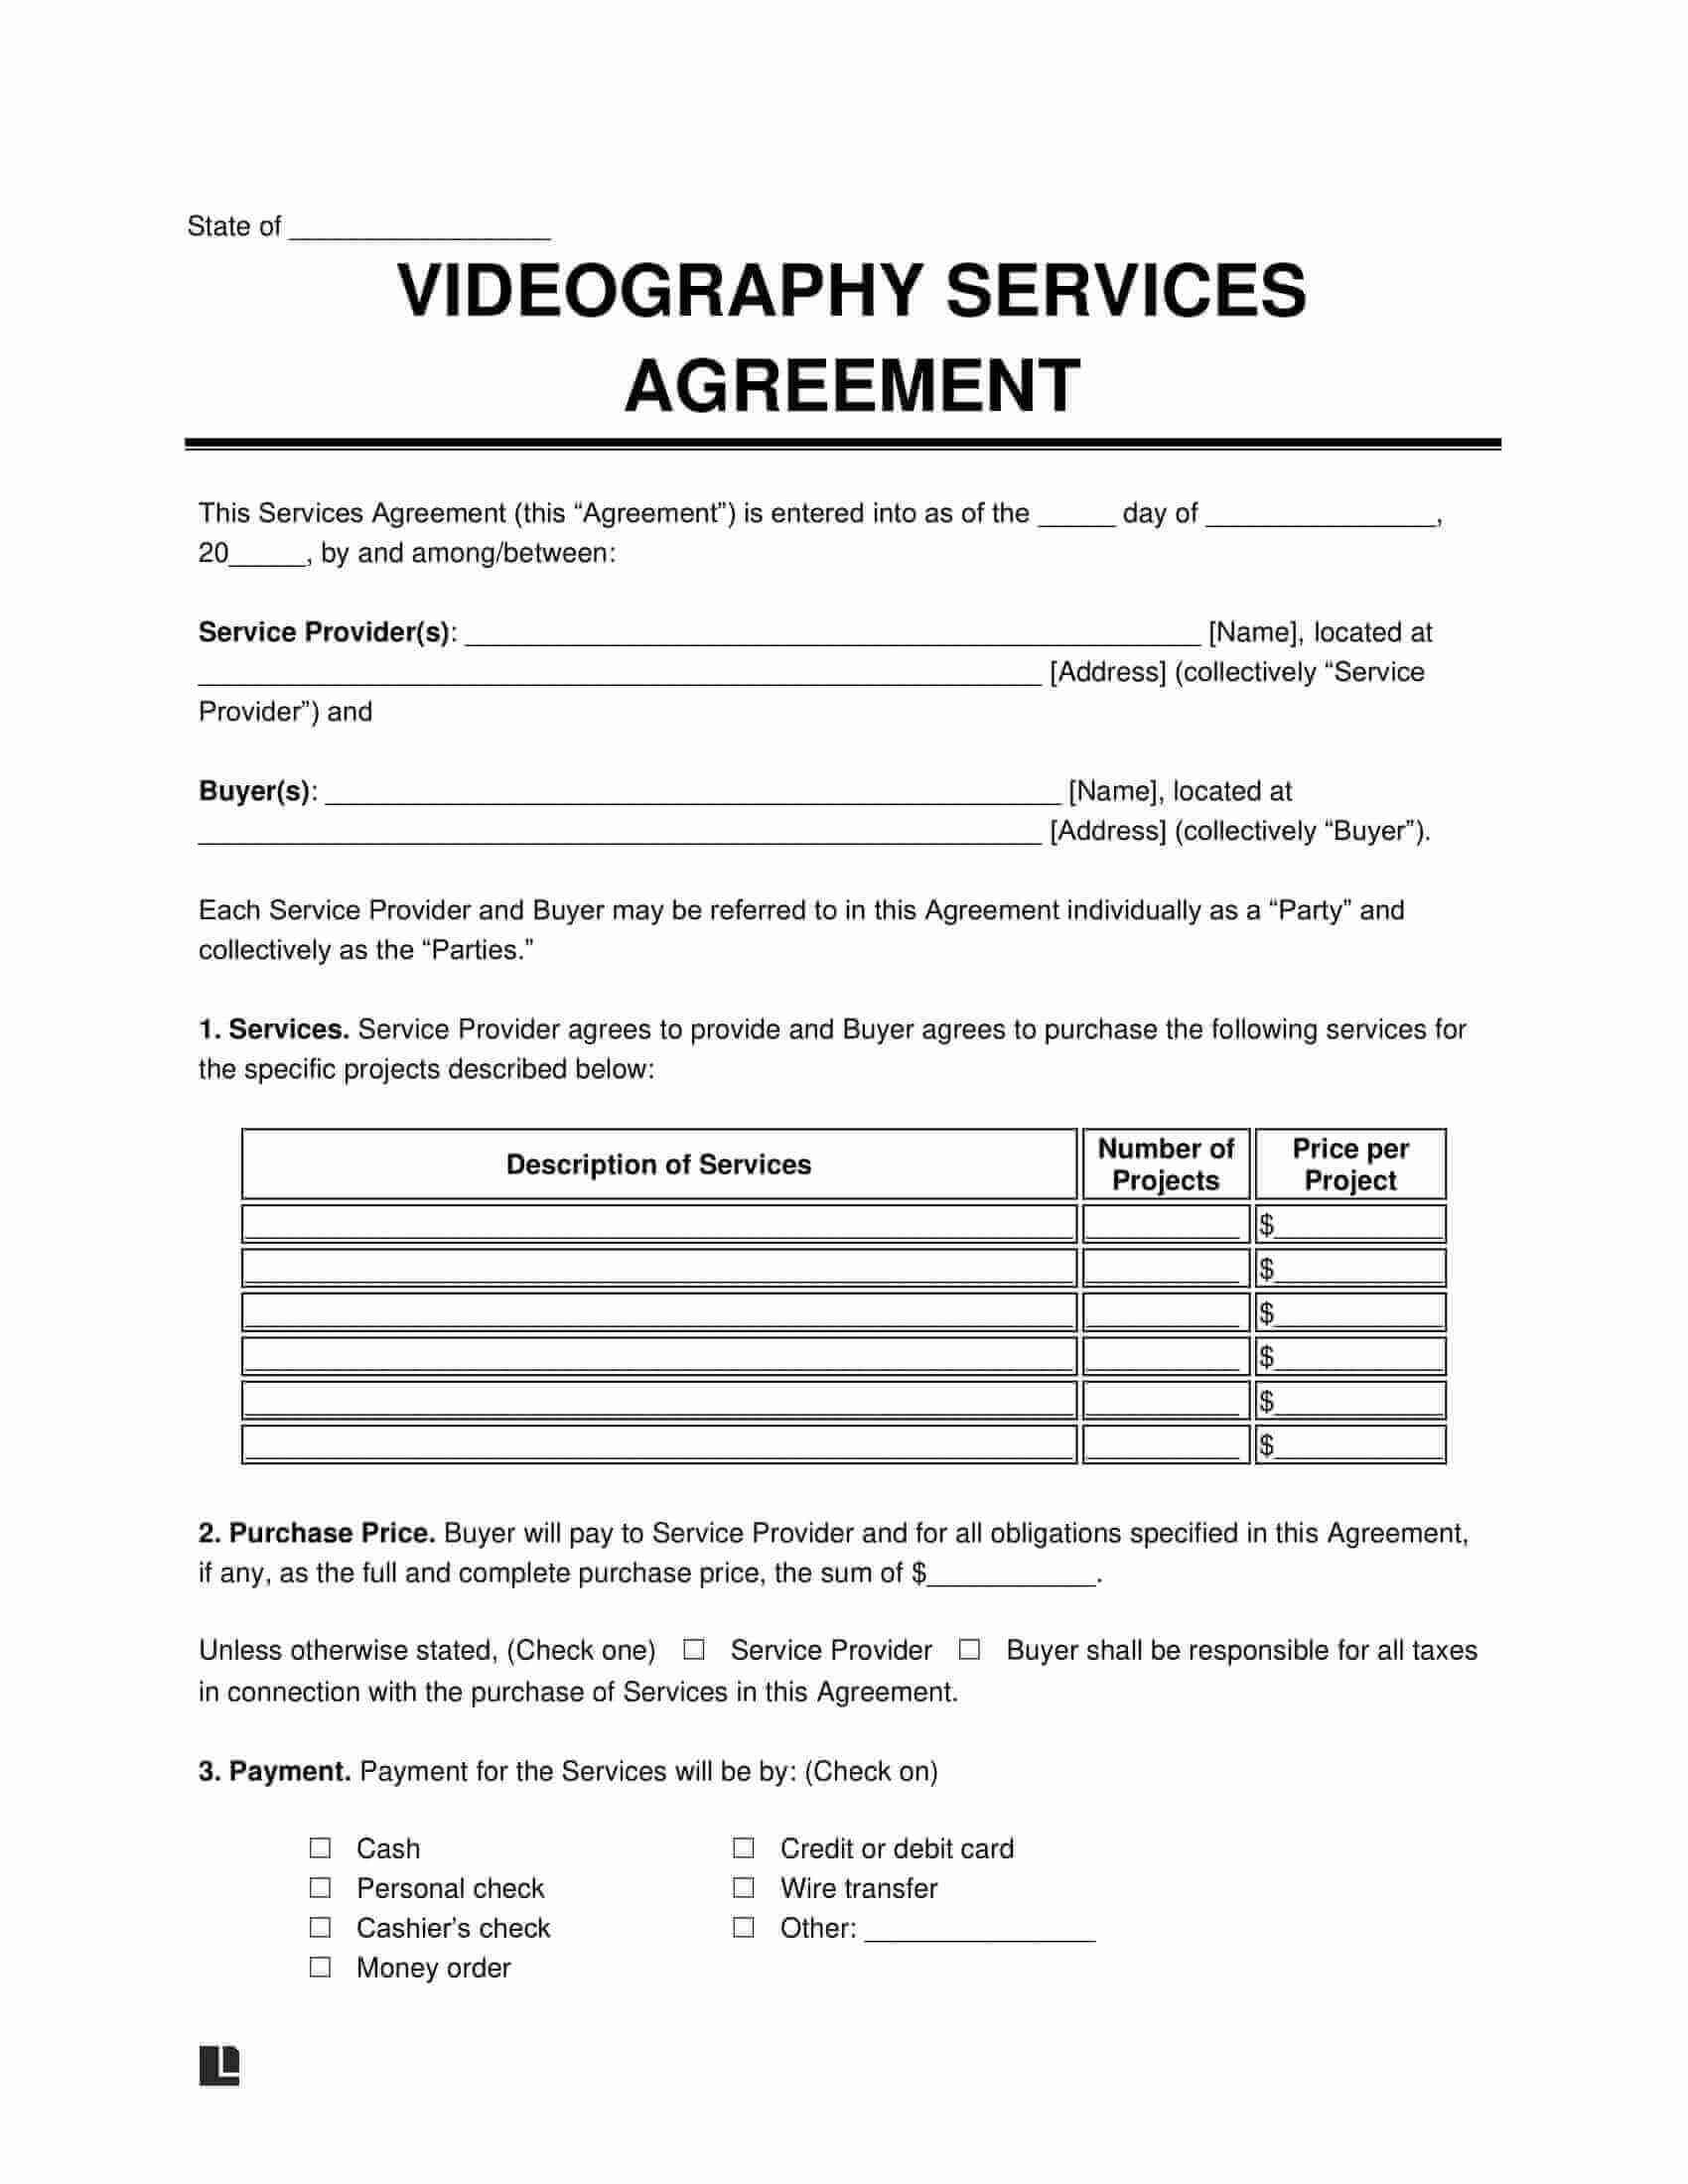 videography-services-contract